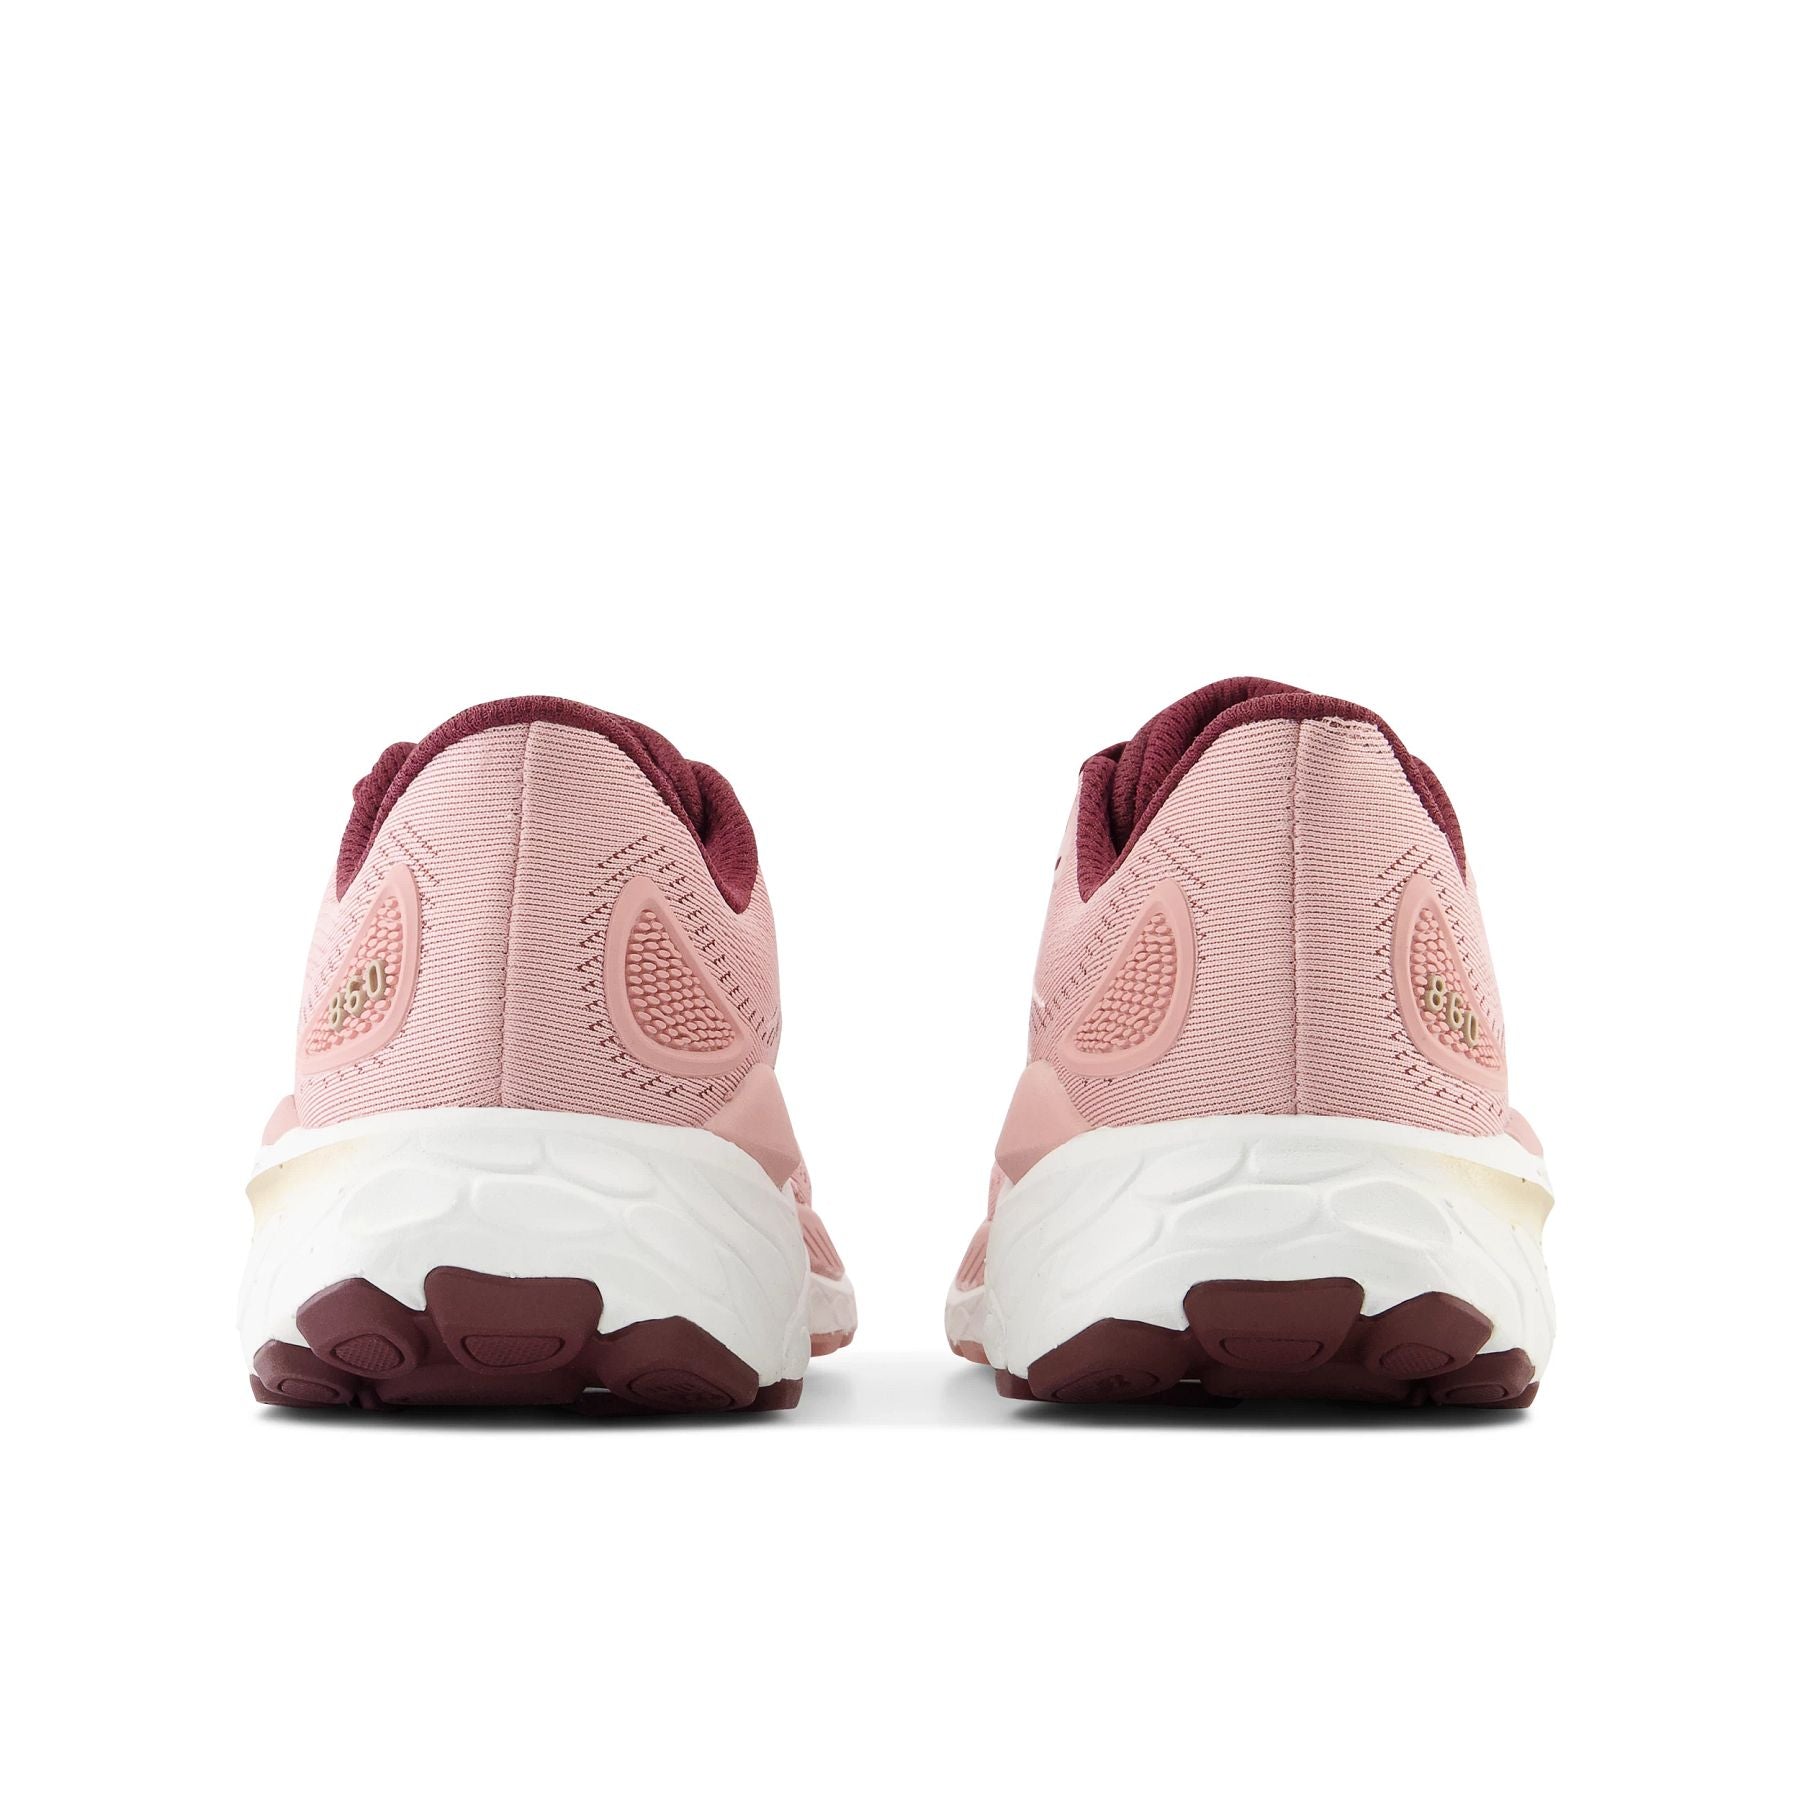 Back view of the Women's 860 V13 by New Balance in the color Pink Moon/Burgandy